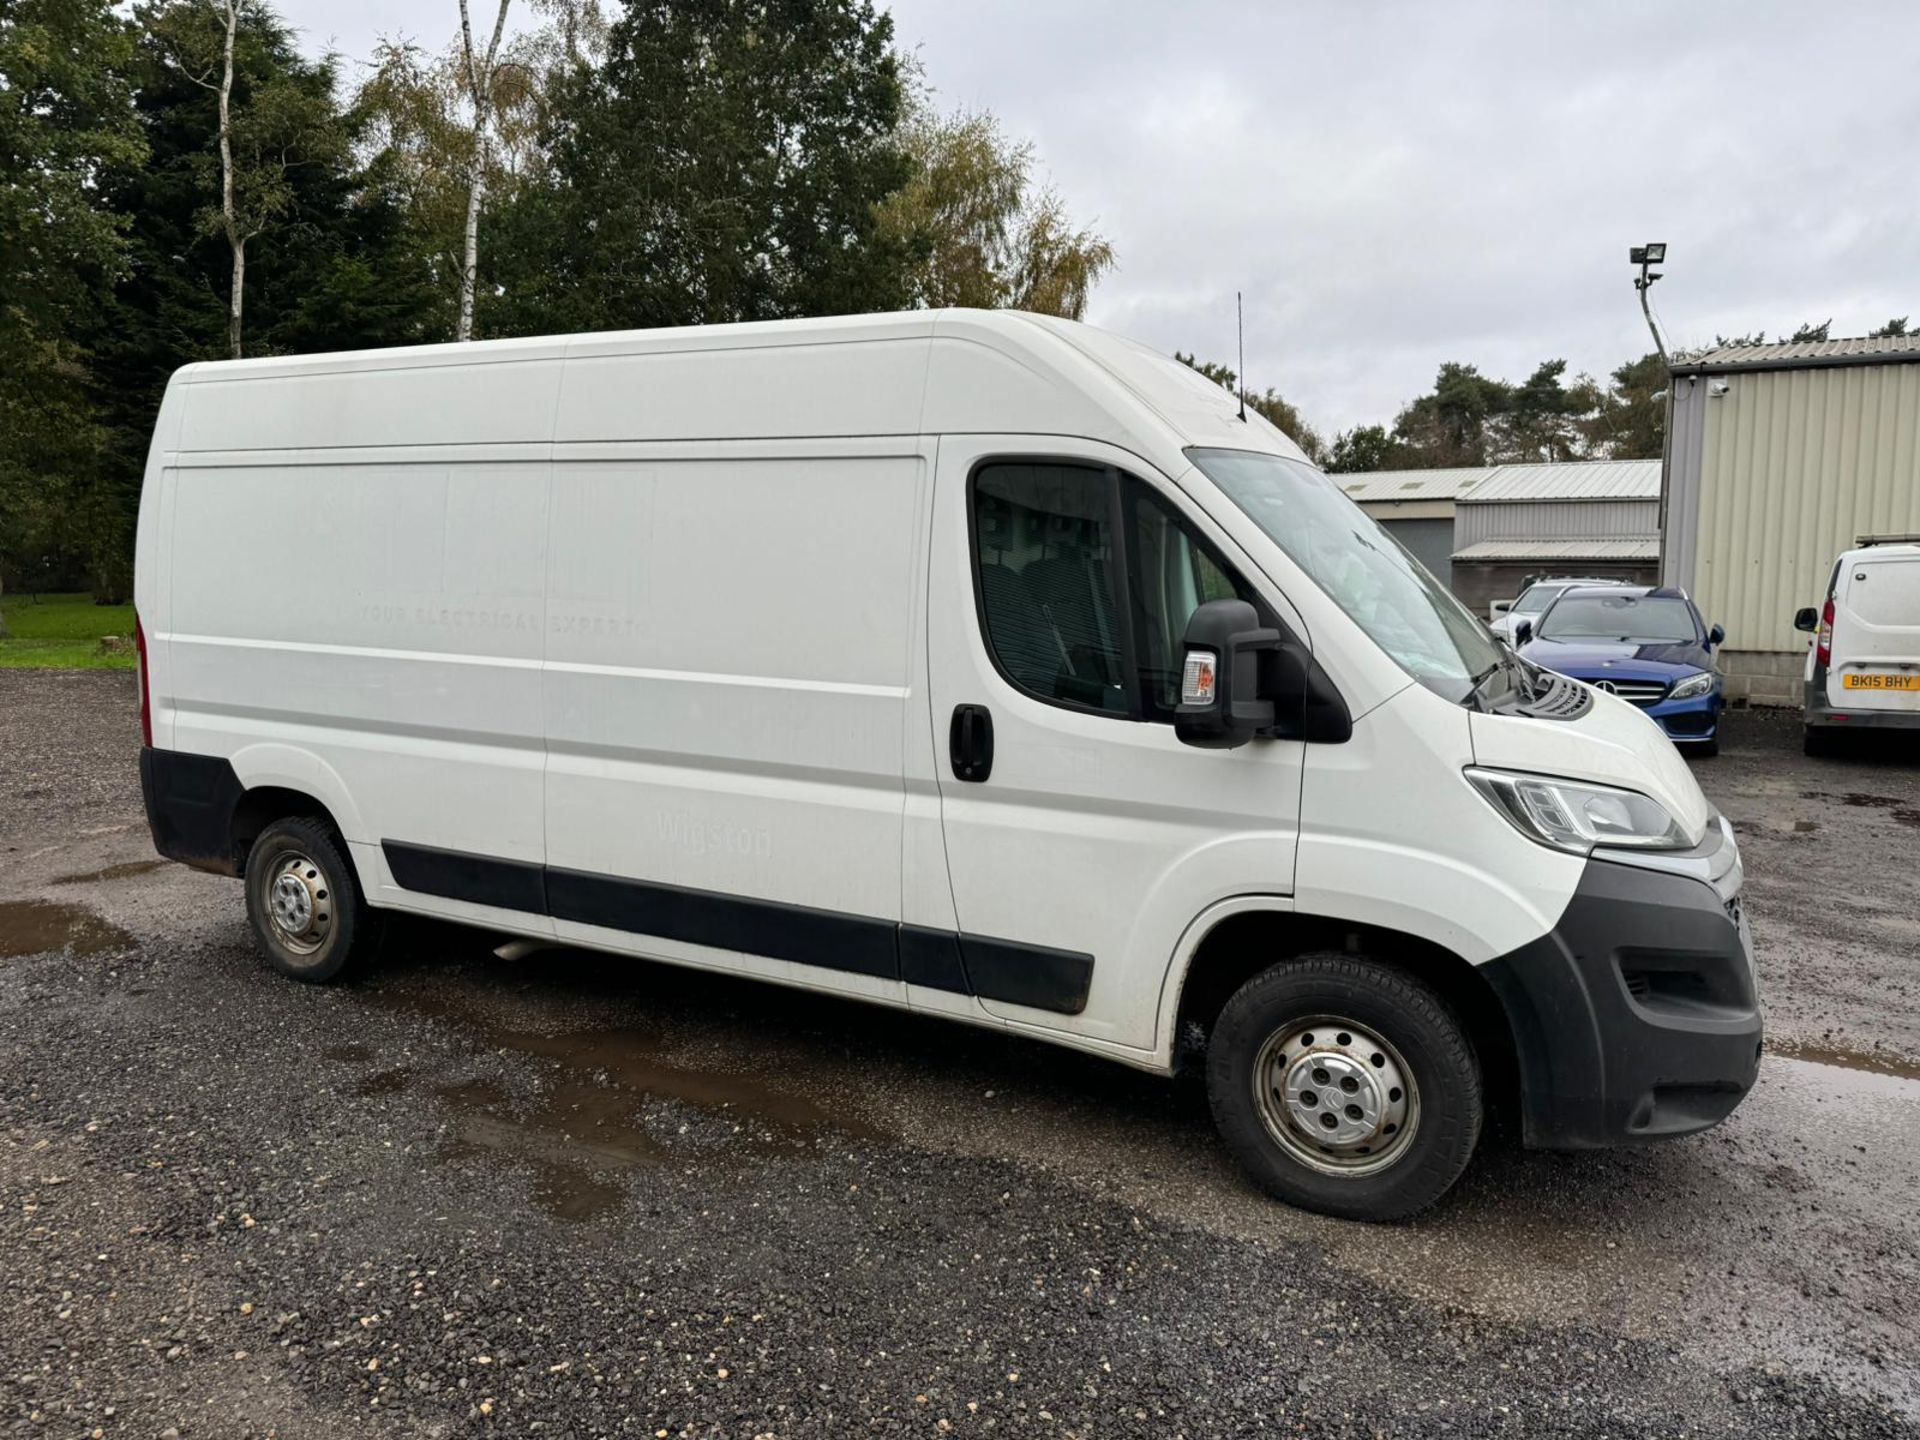 2019 19 CITROEN RELAY PANEL VAN -140K MILES - L3 H2 MODEL - PLY LINED - AIR CON - Image 2 of 8